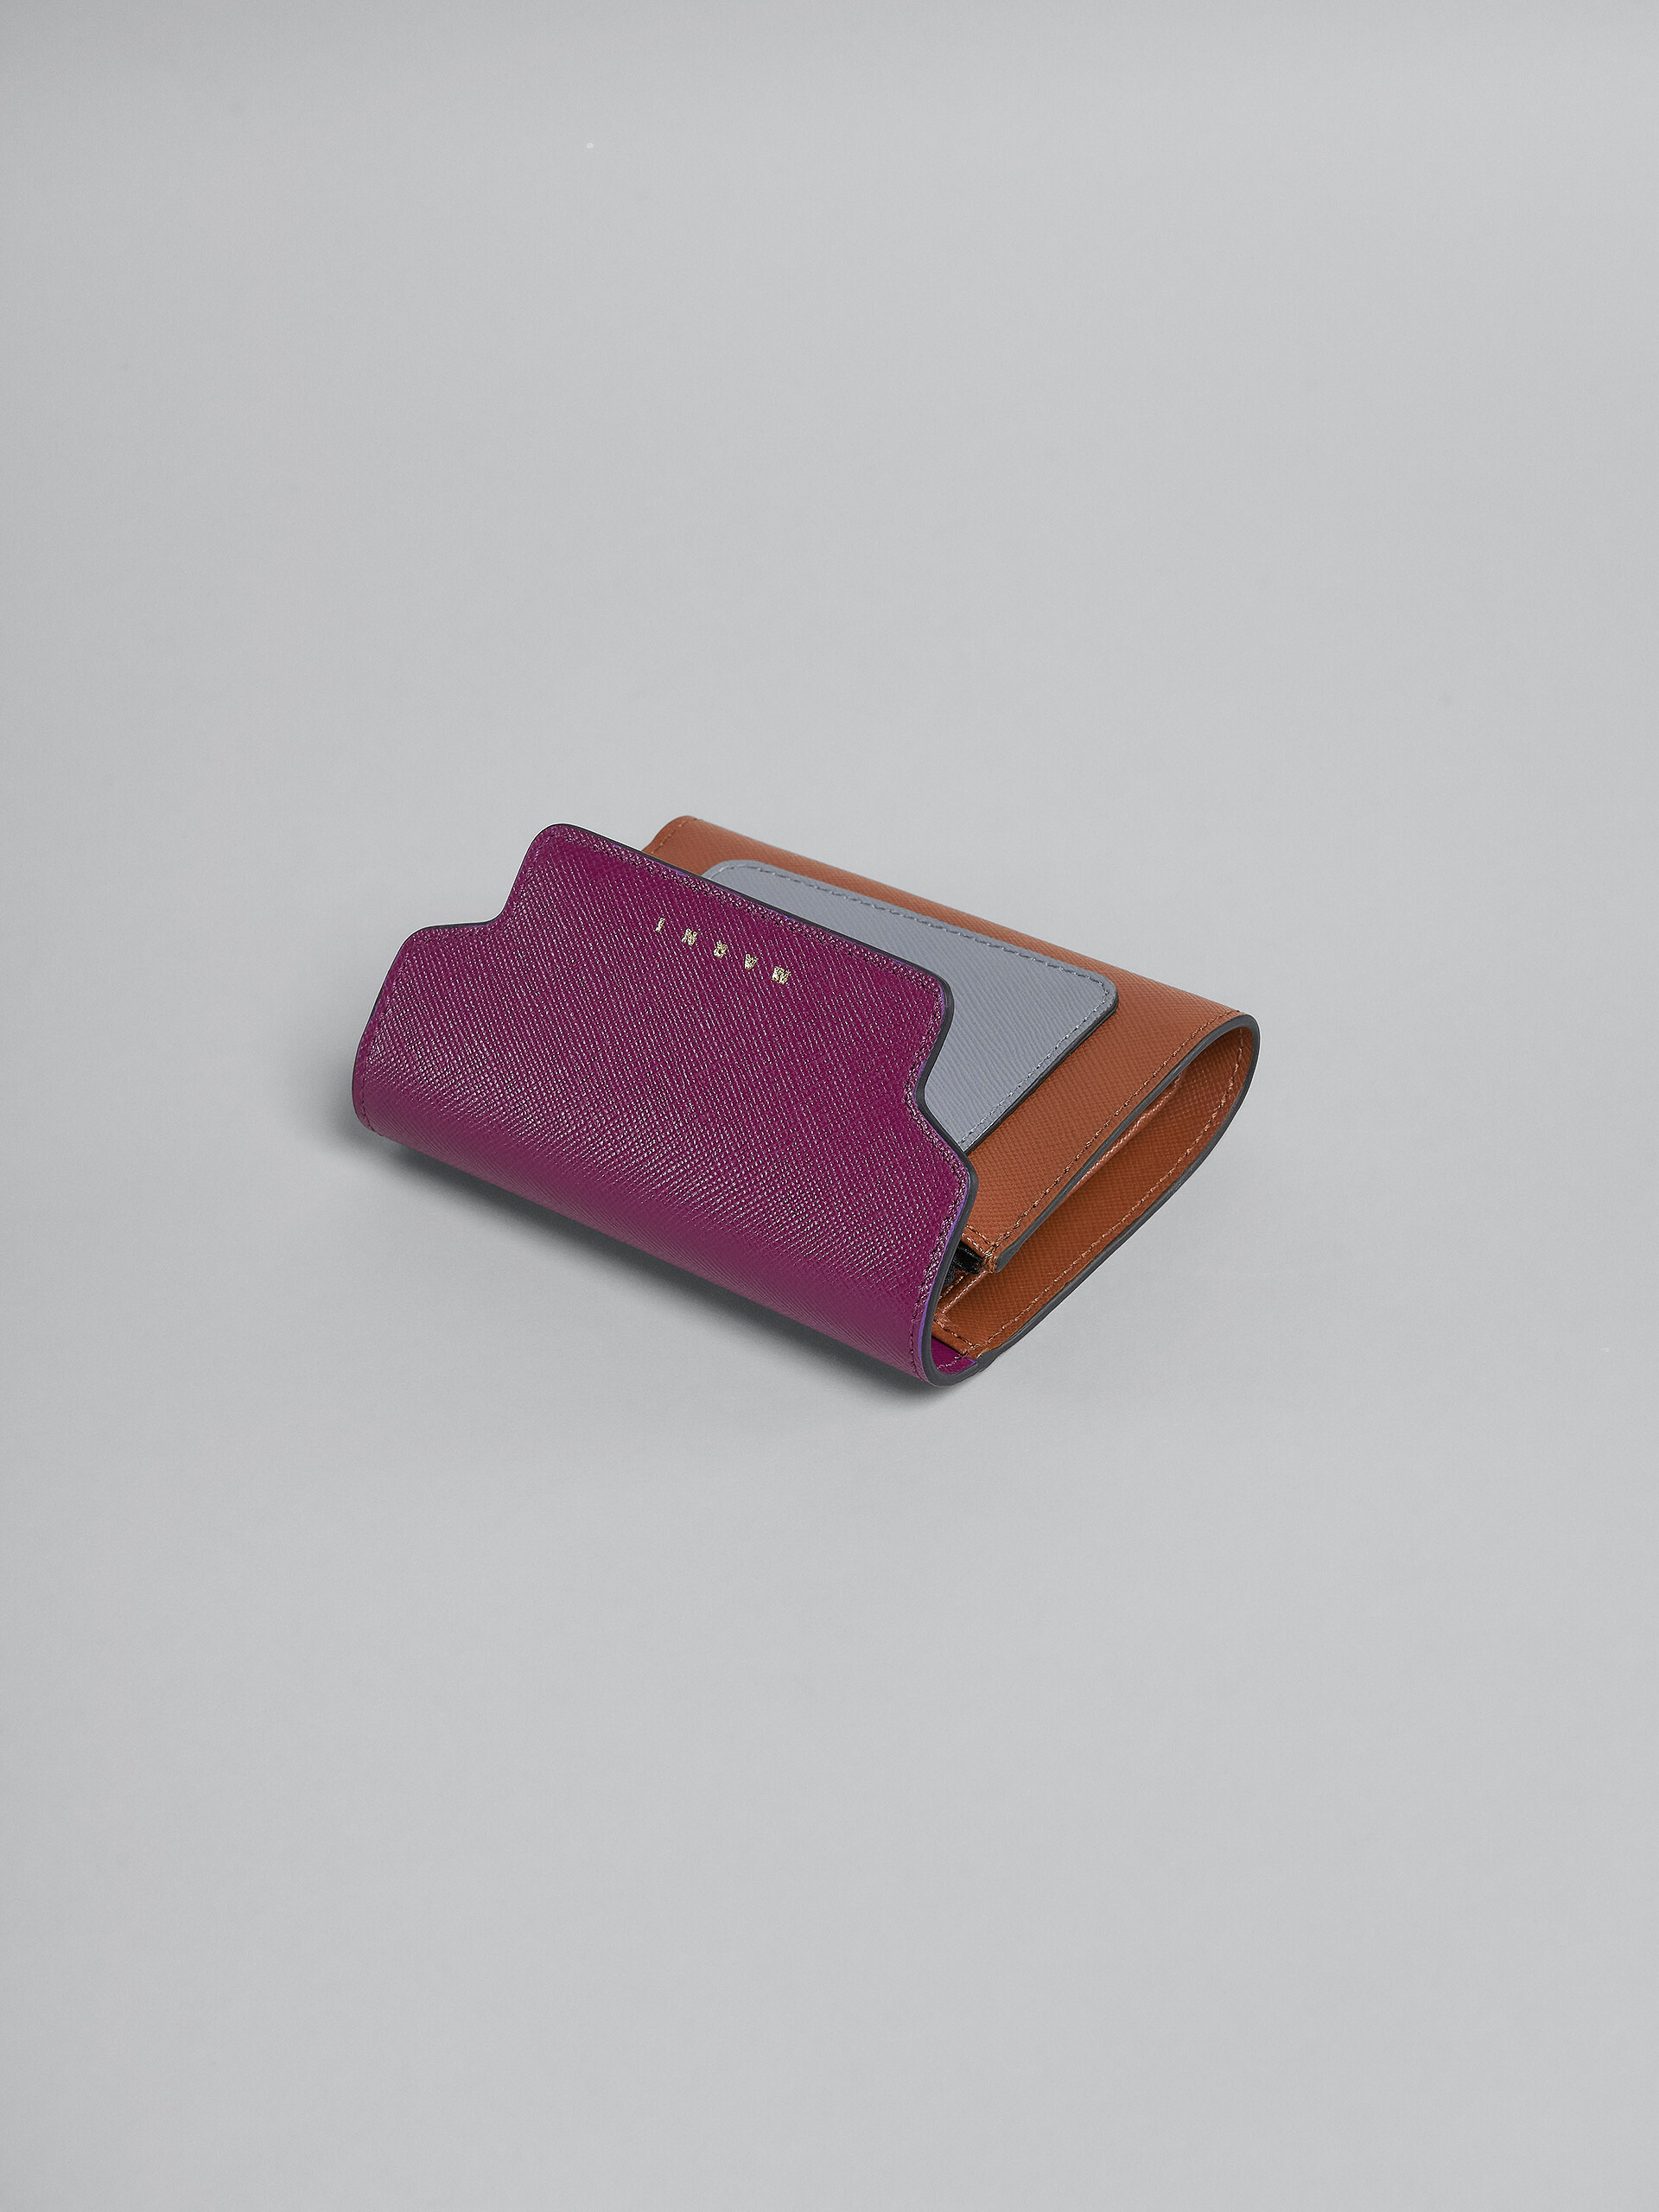 Purple grey and brown saffiano tri-fold wallet - Wallets - Image 4